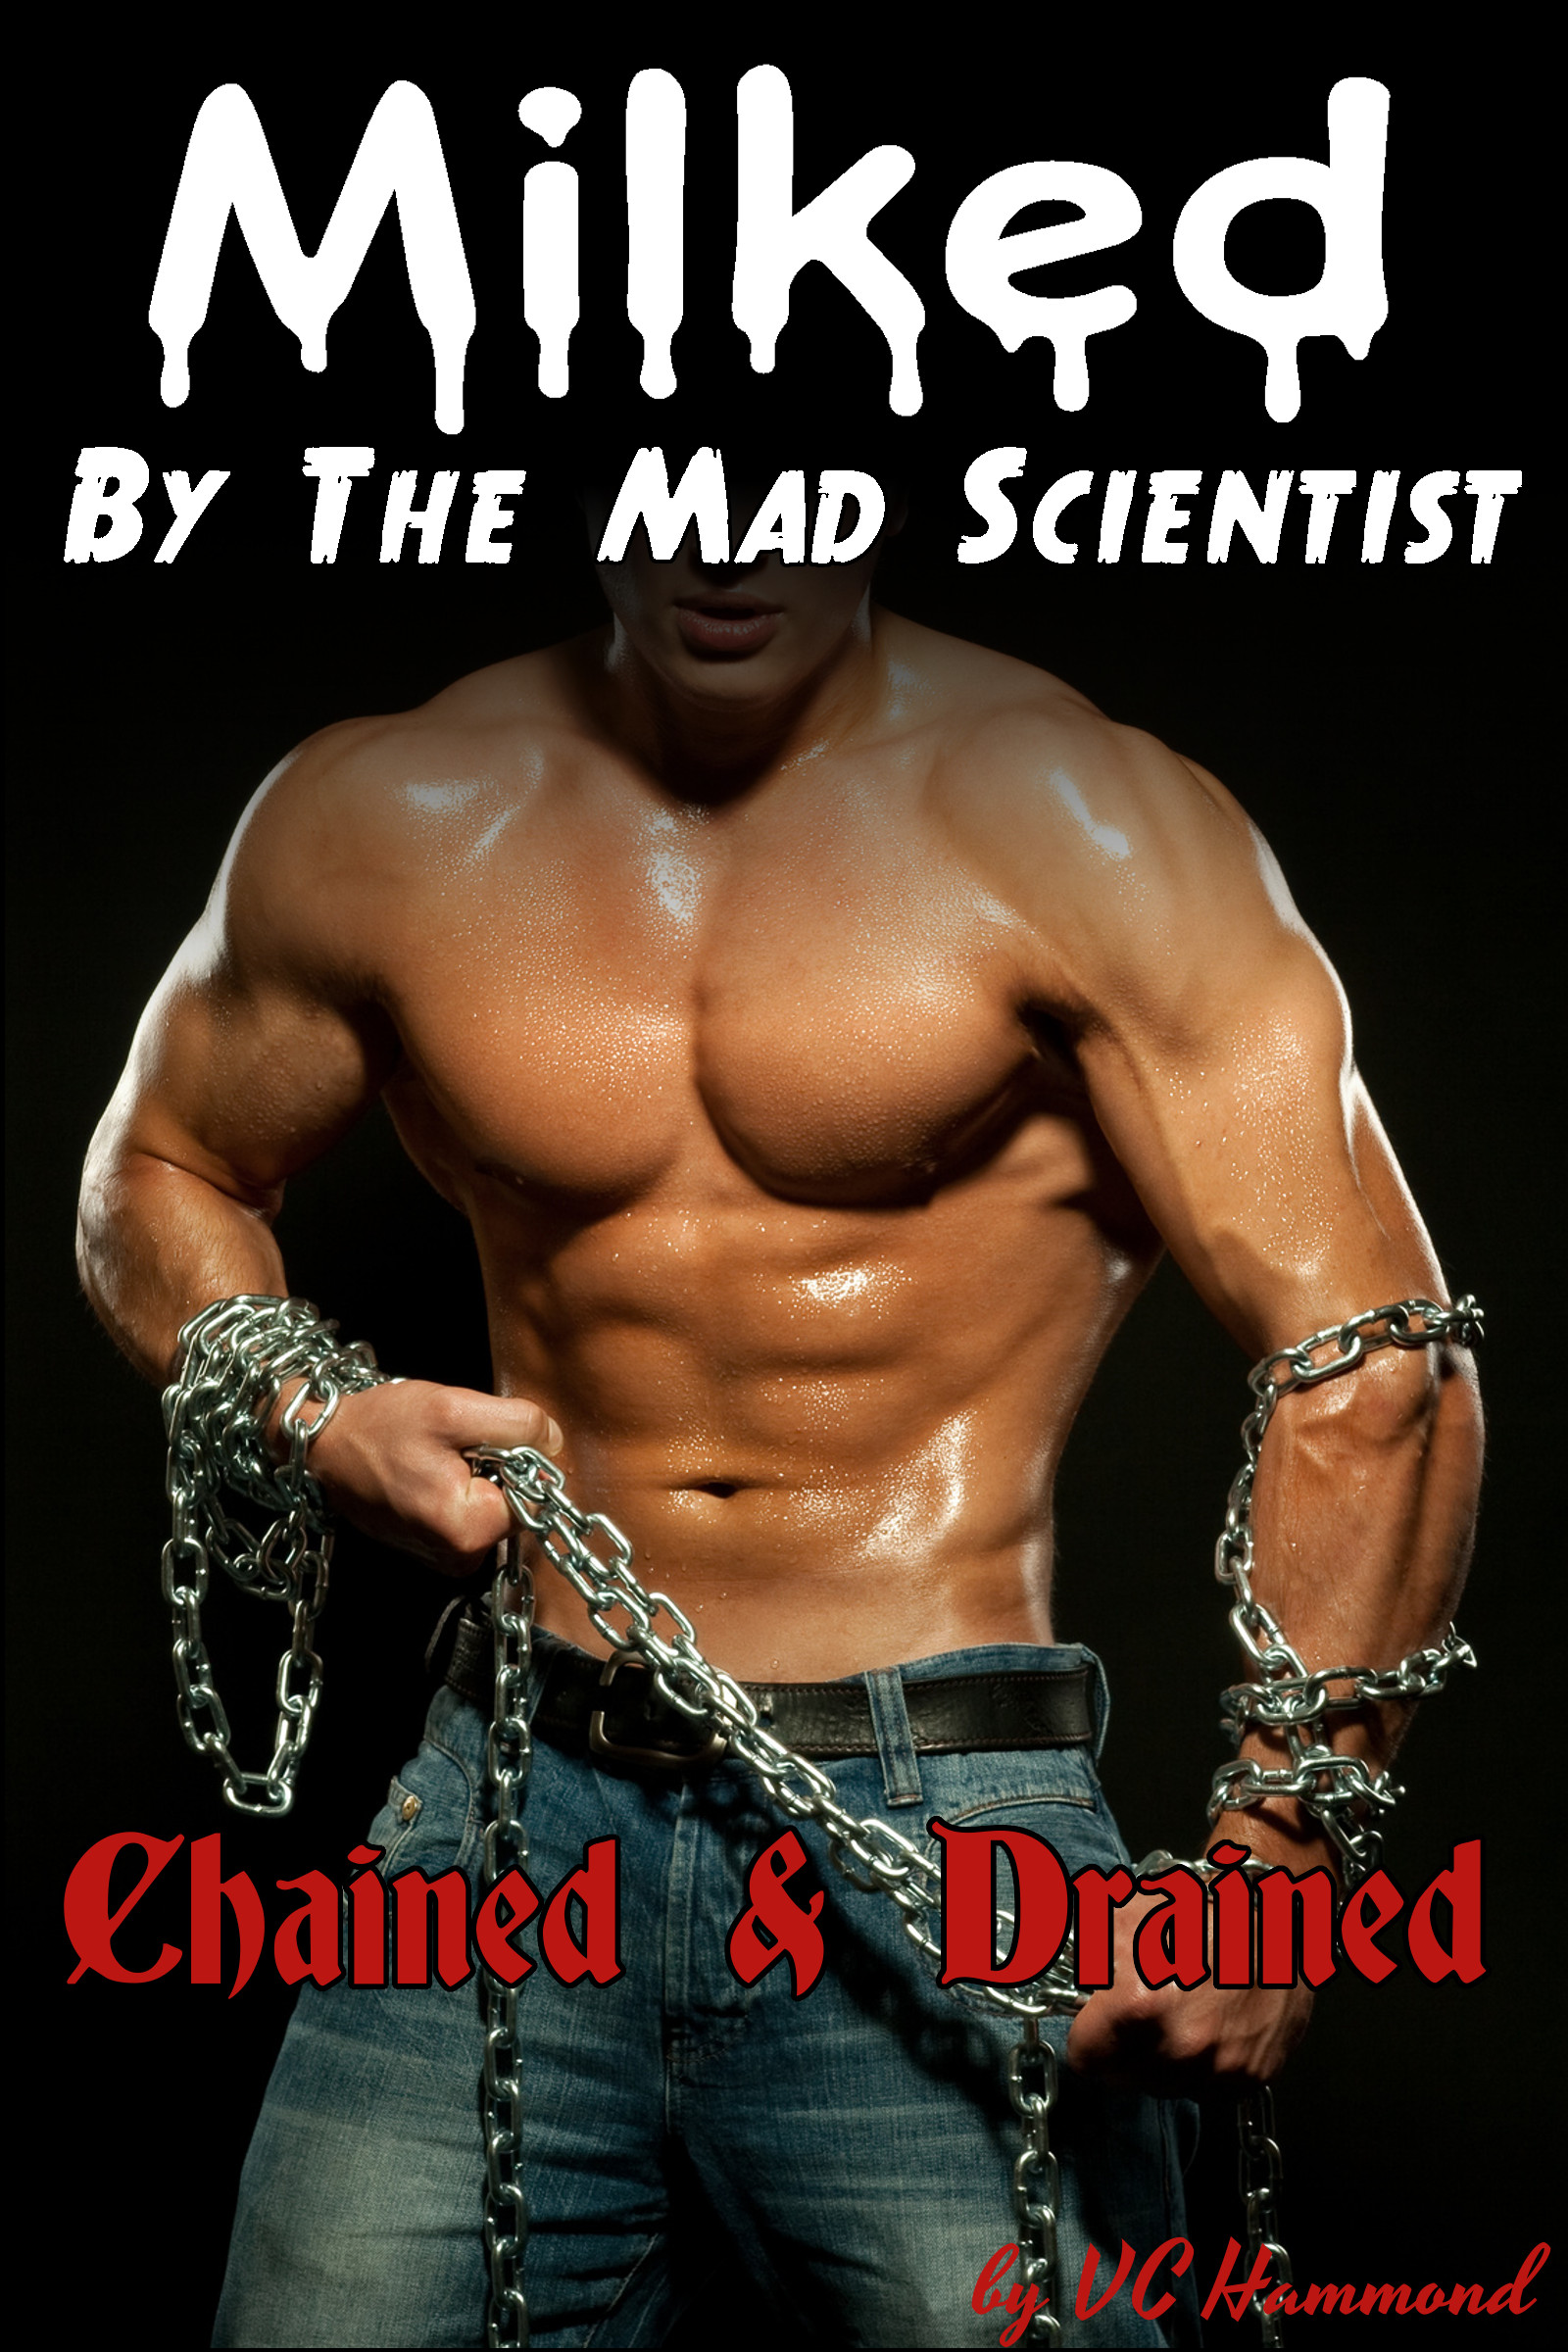 Milked by the Mad Scientist: Chained & Drained